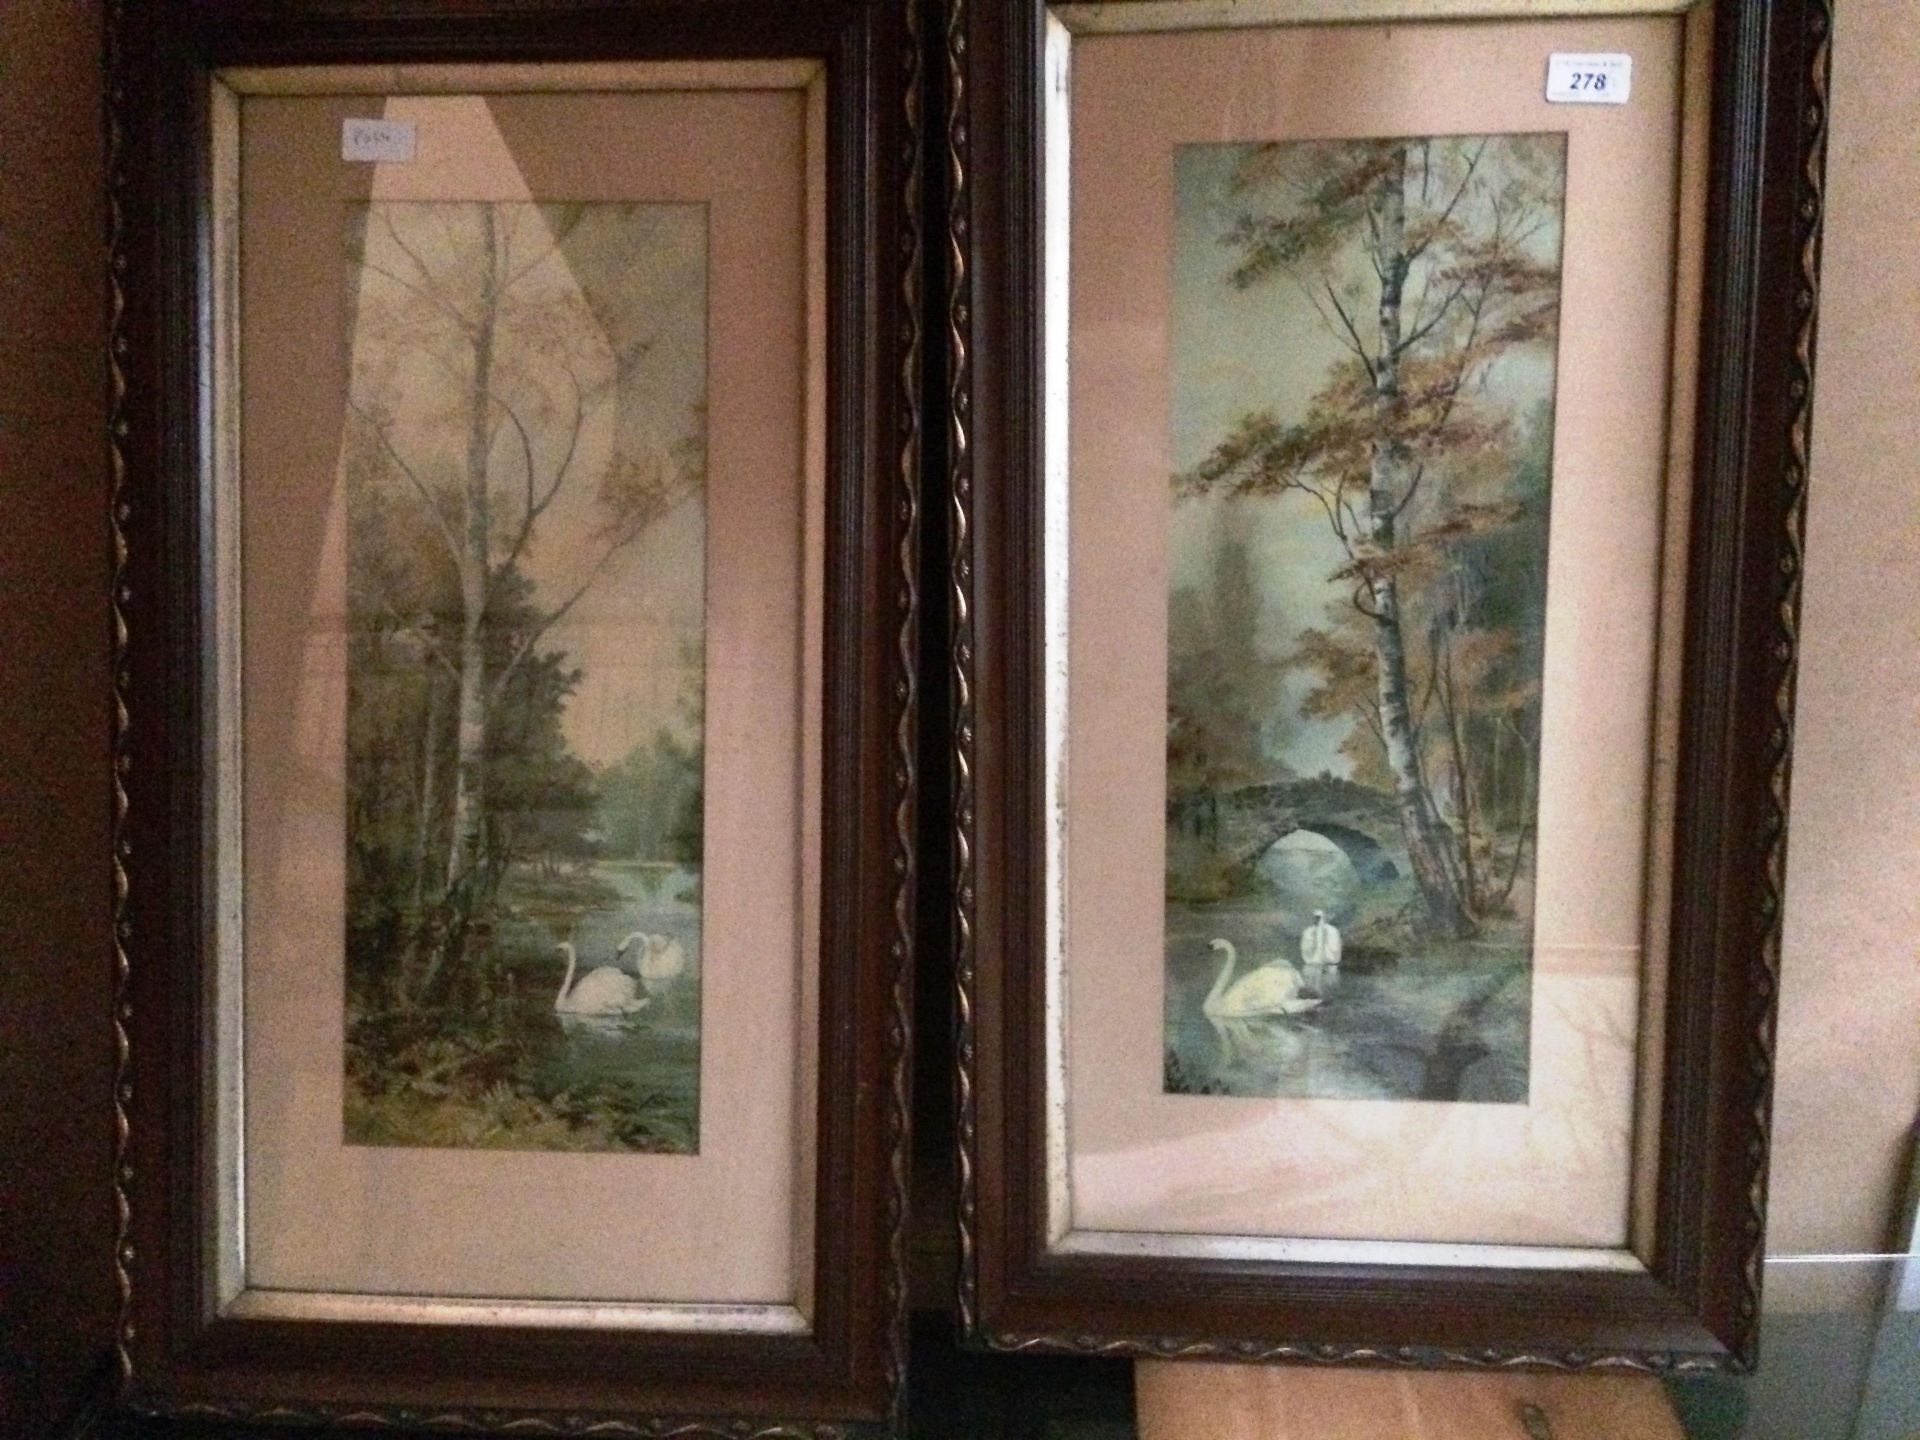 A pair of ornate wood finish framed prints - Swans in a woodland setting each 48 x 20cm